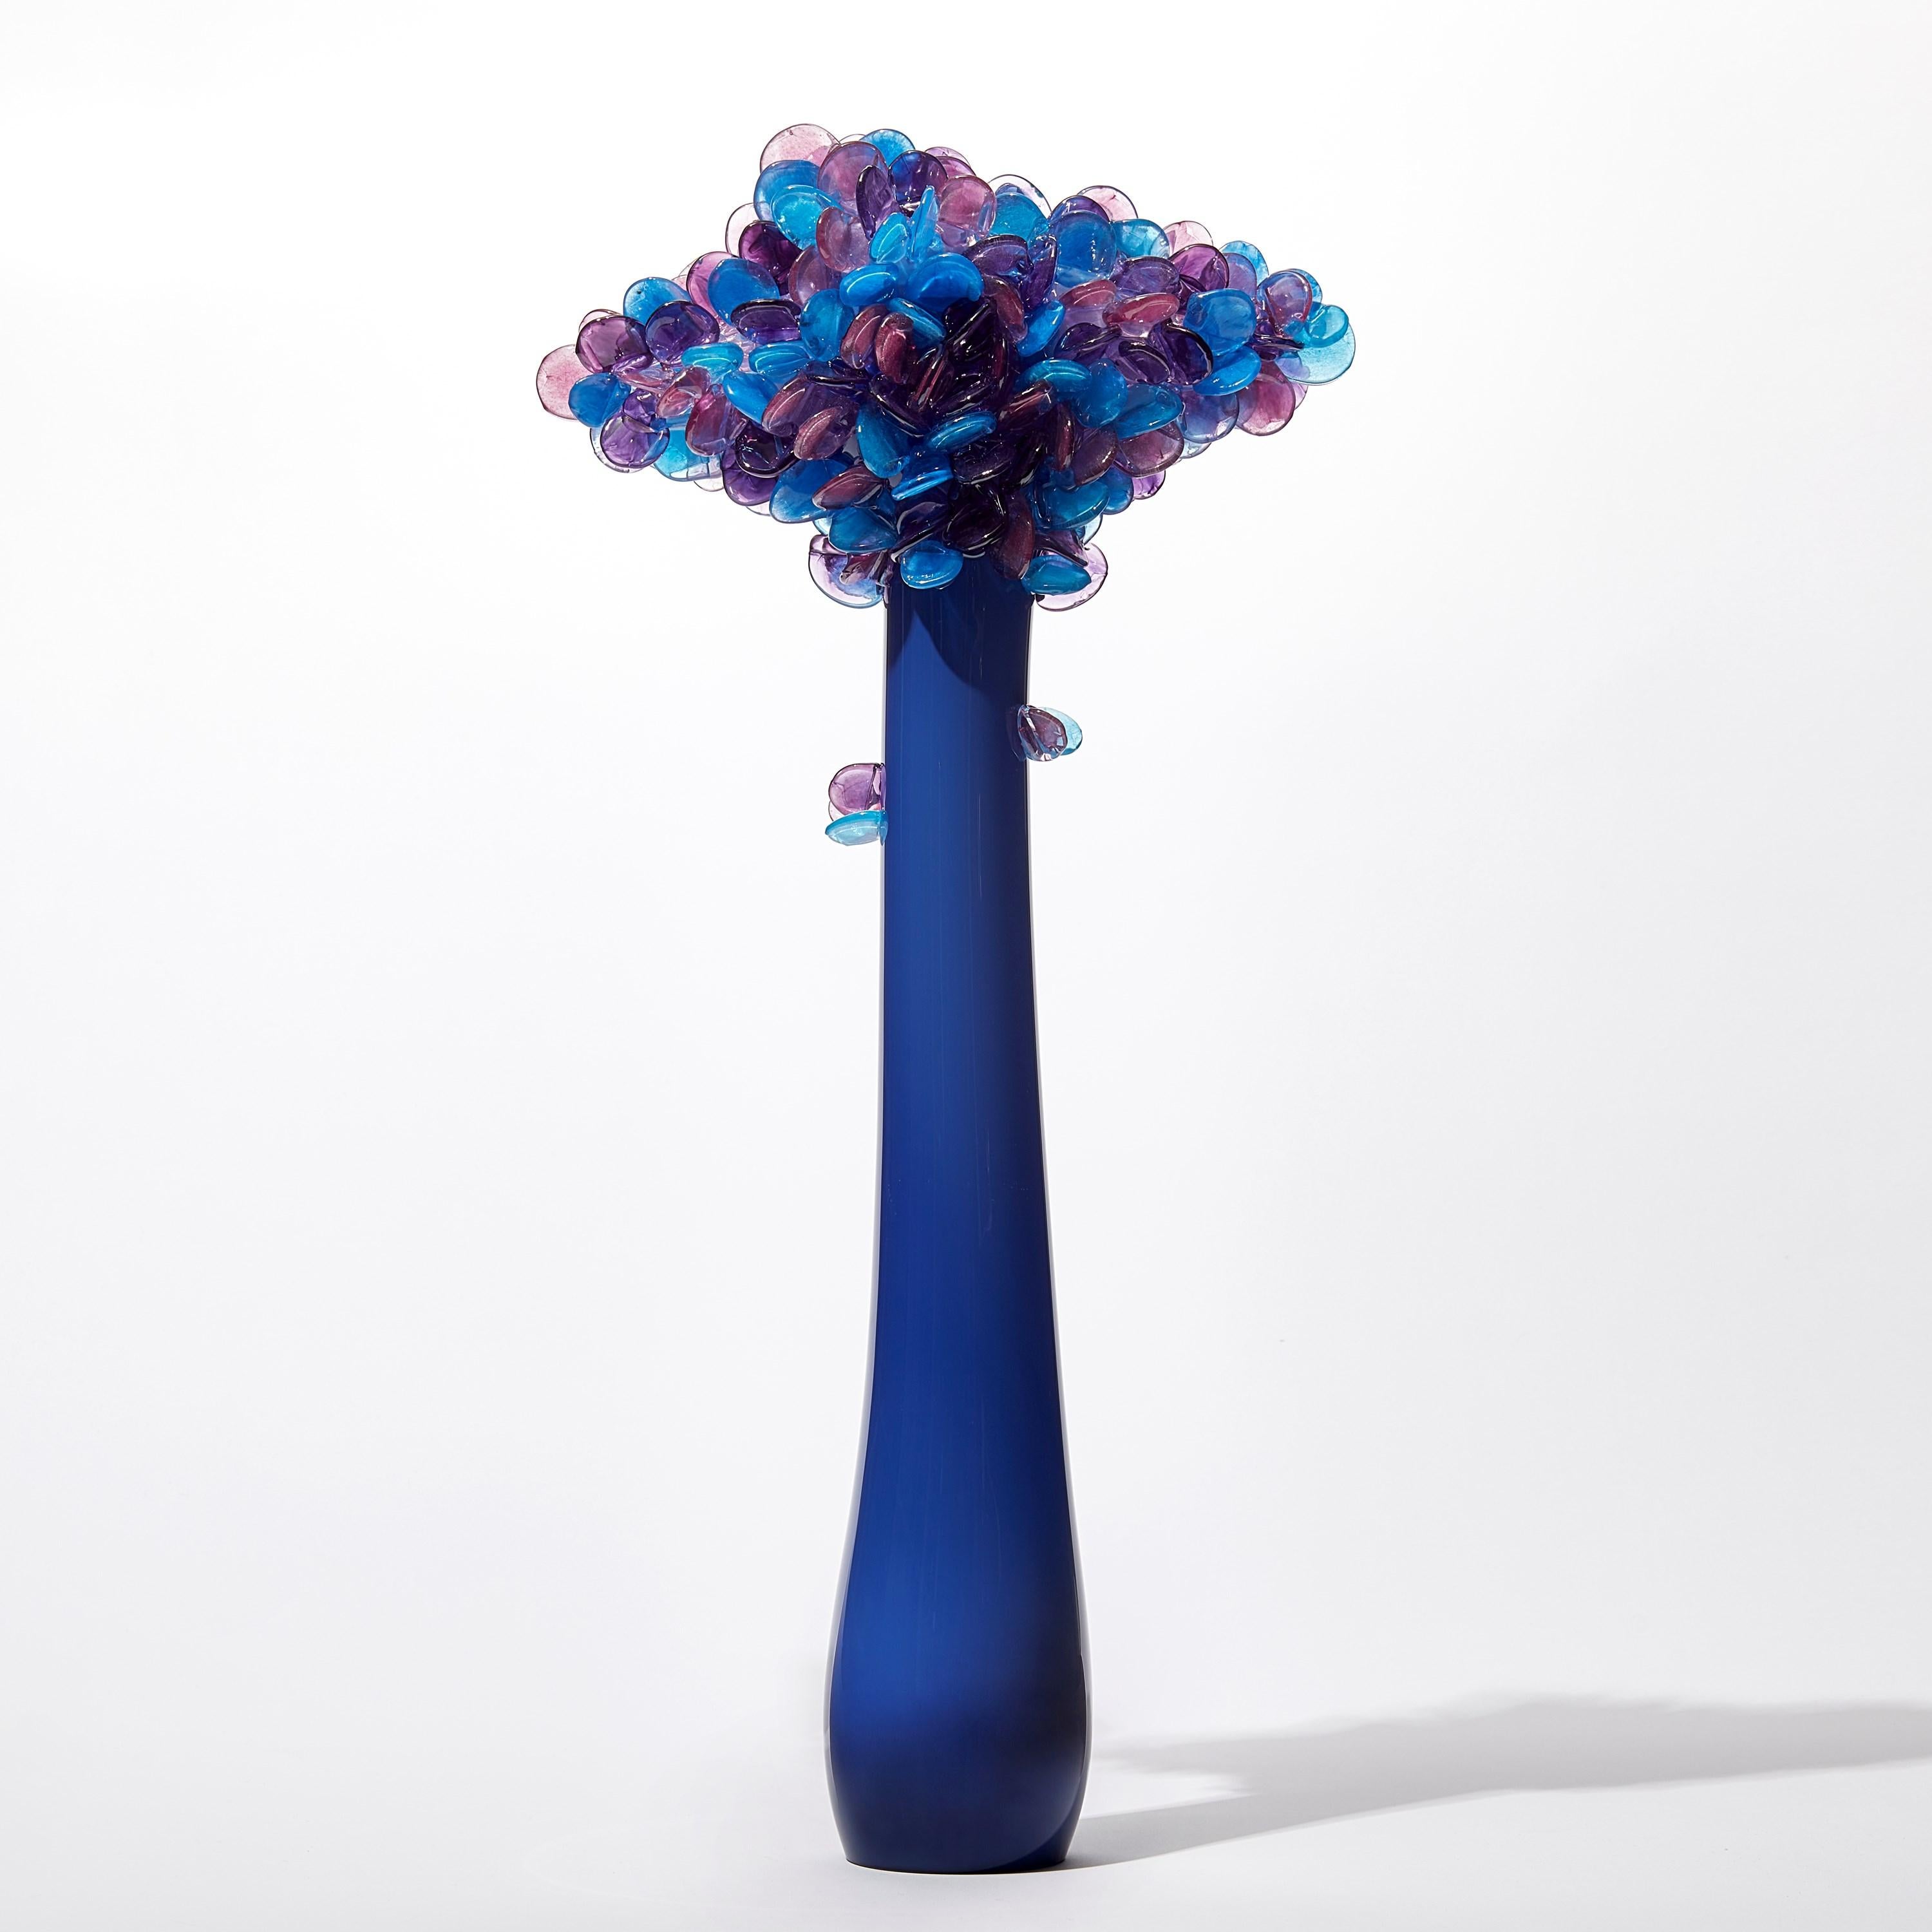 'Enchanted Dawn in Iron Blue III' is a unique handblown and sculpted glass artwork by the British artist, Louis Thompson.

With both his Enchanted Dawn and Dusk collections, Thompson brings a joyous and playful element to his glass. Gracious